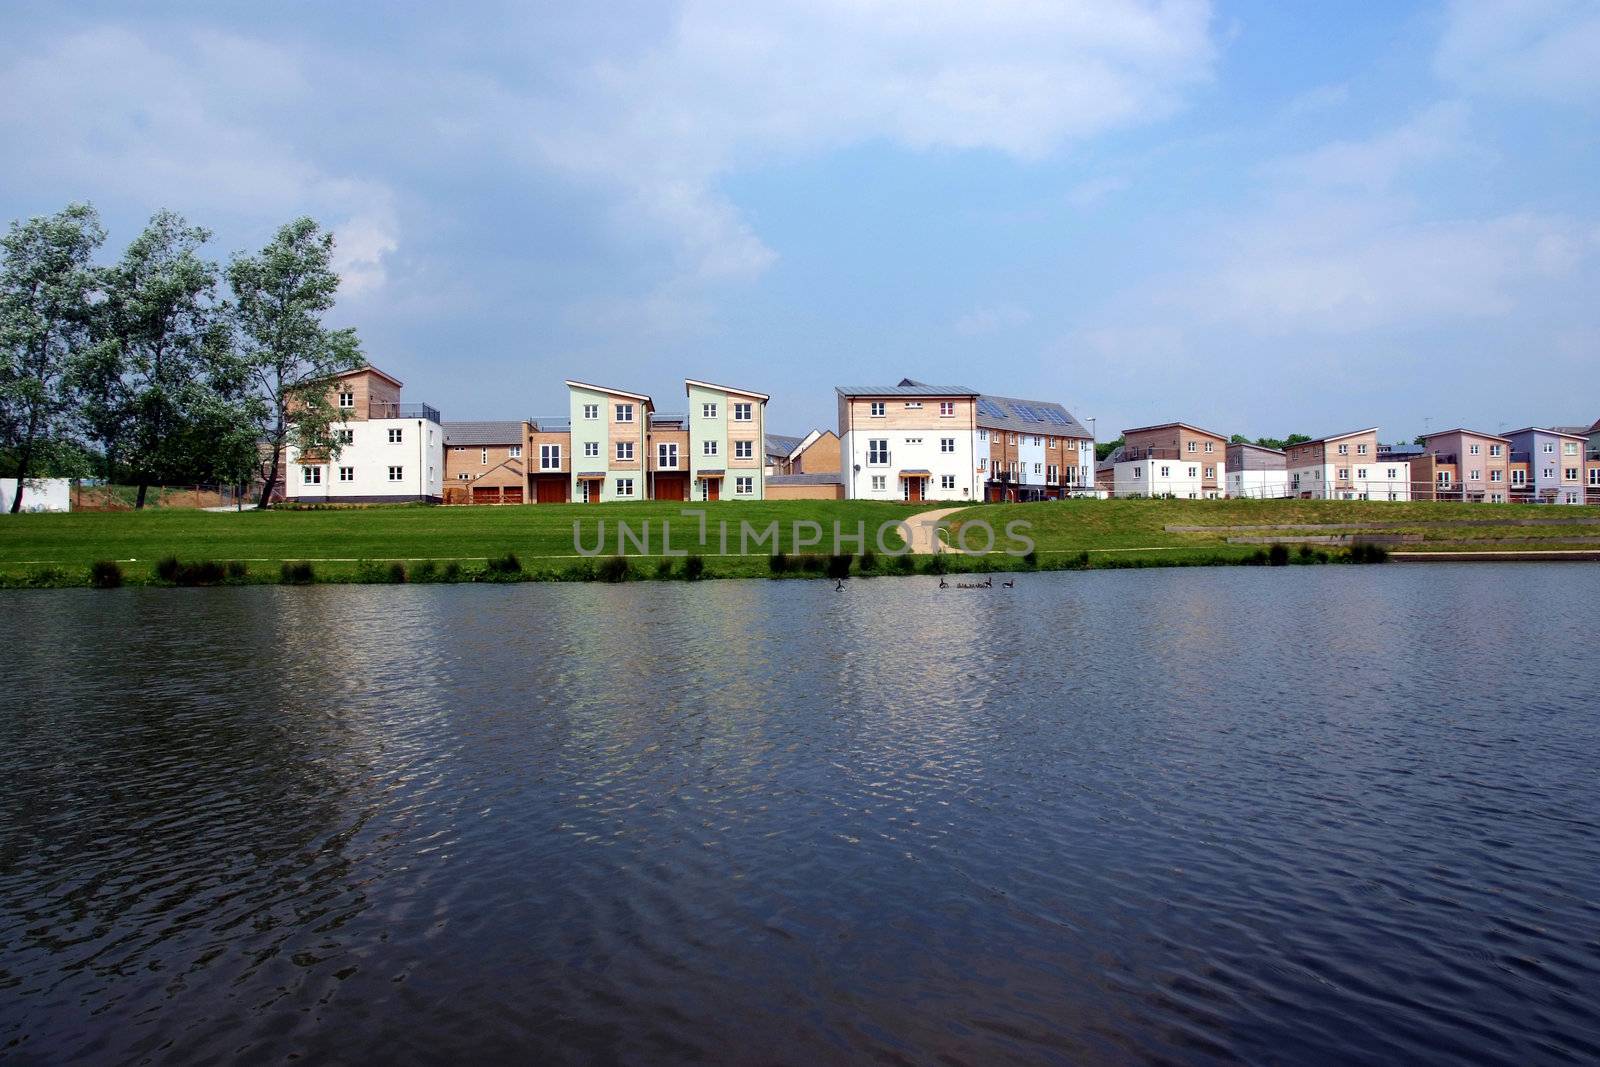 A development of modern housing with a lake in the foreground